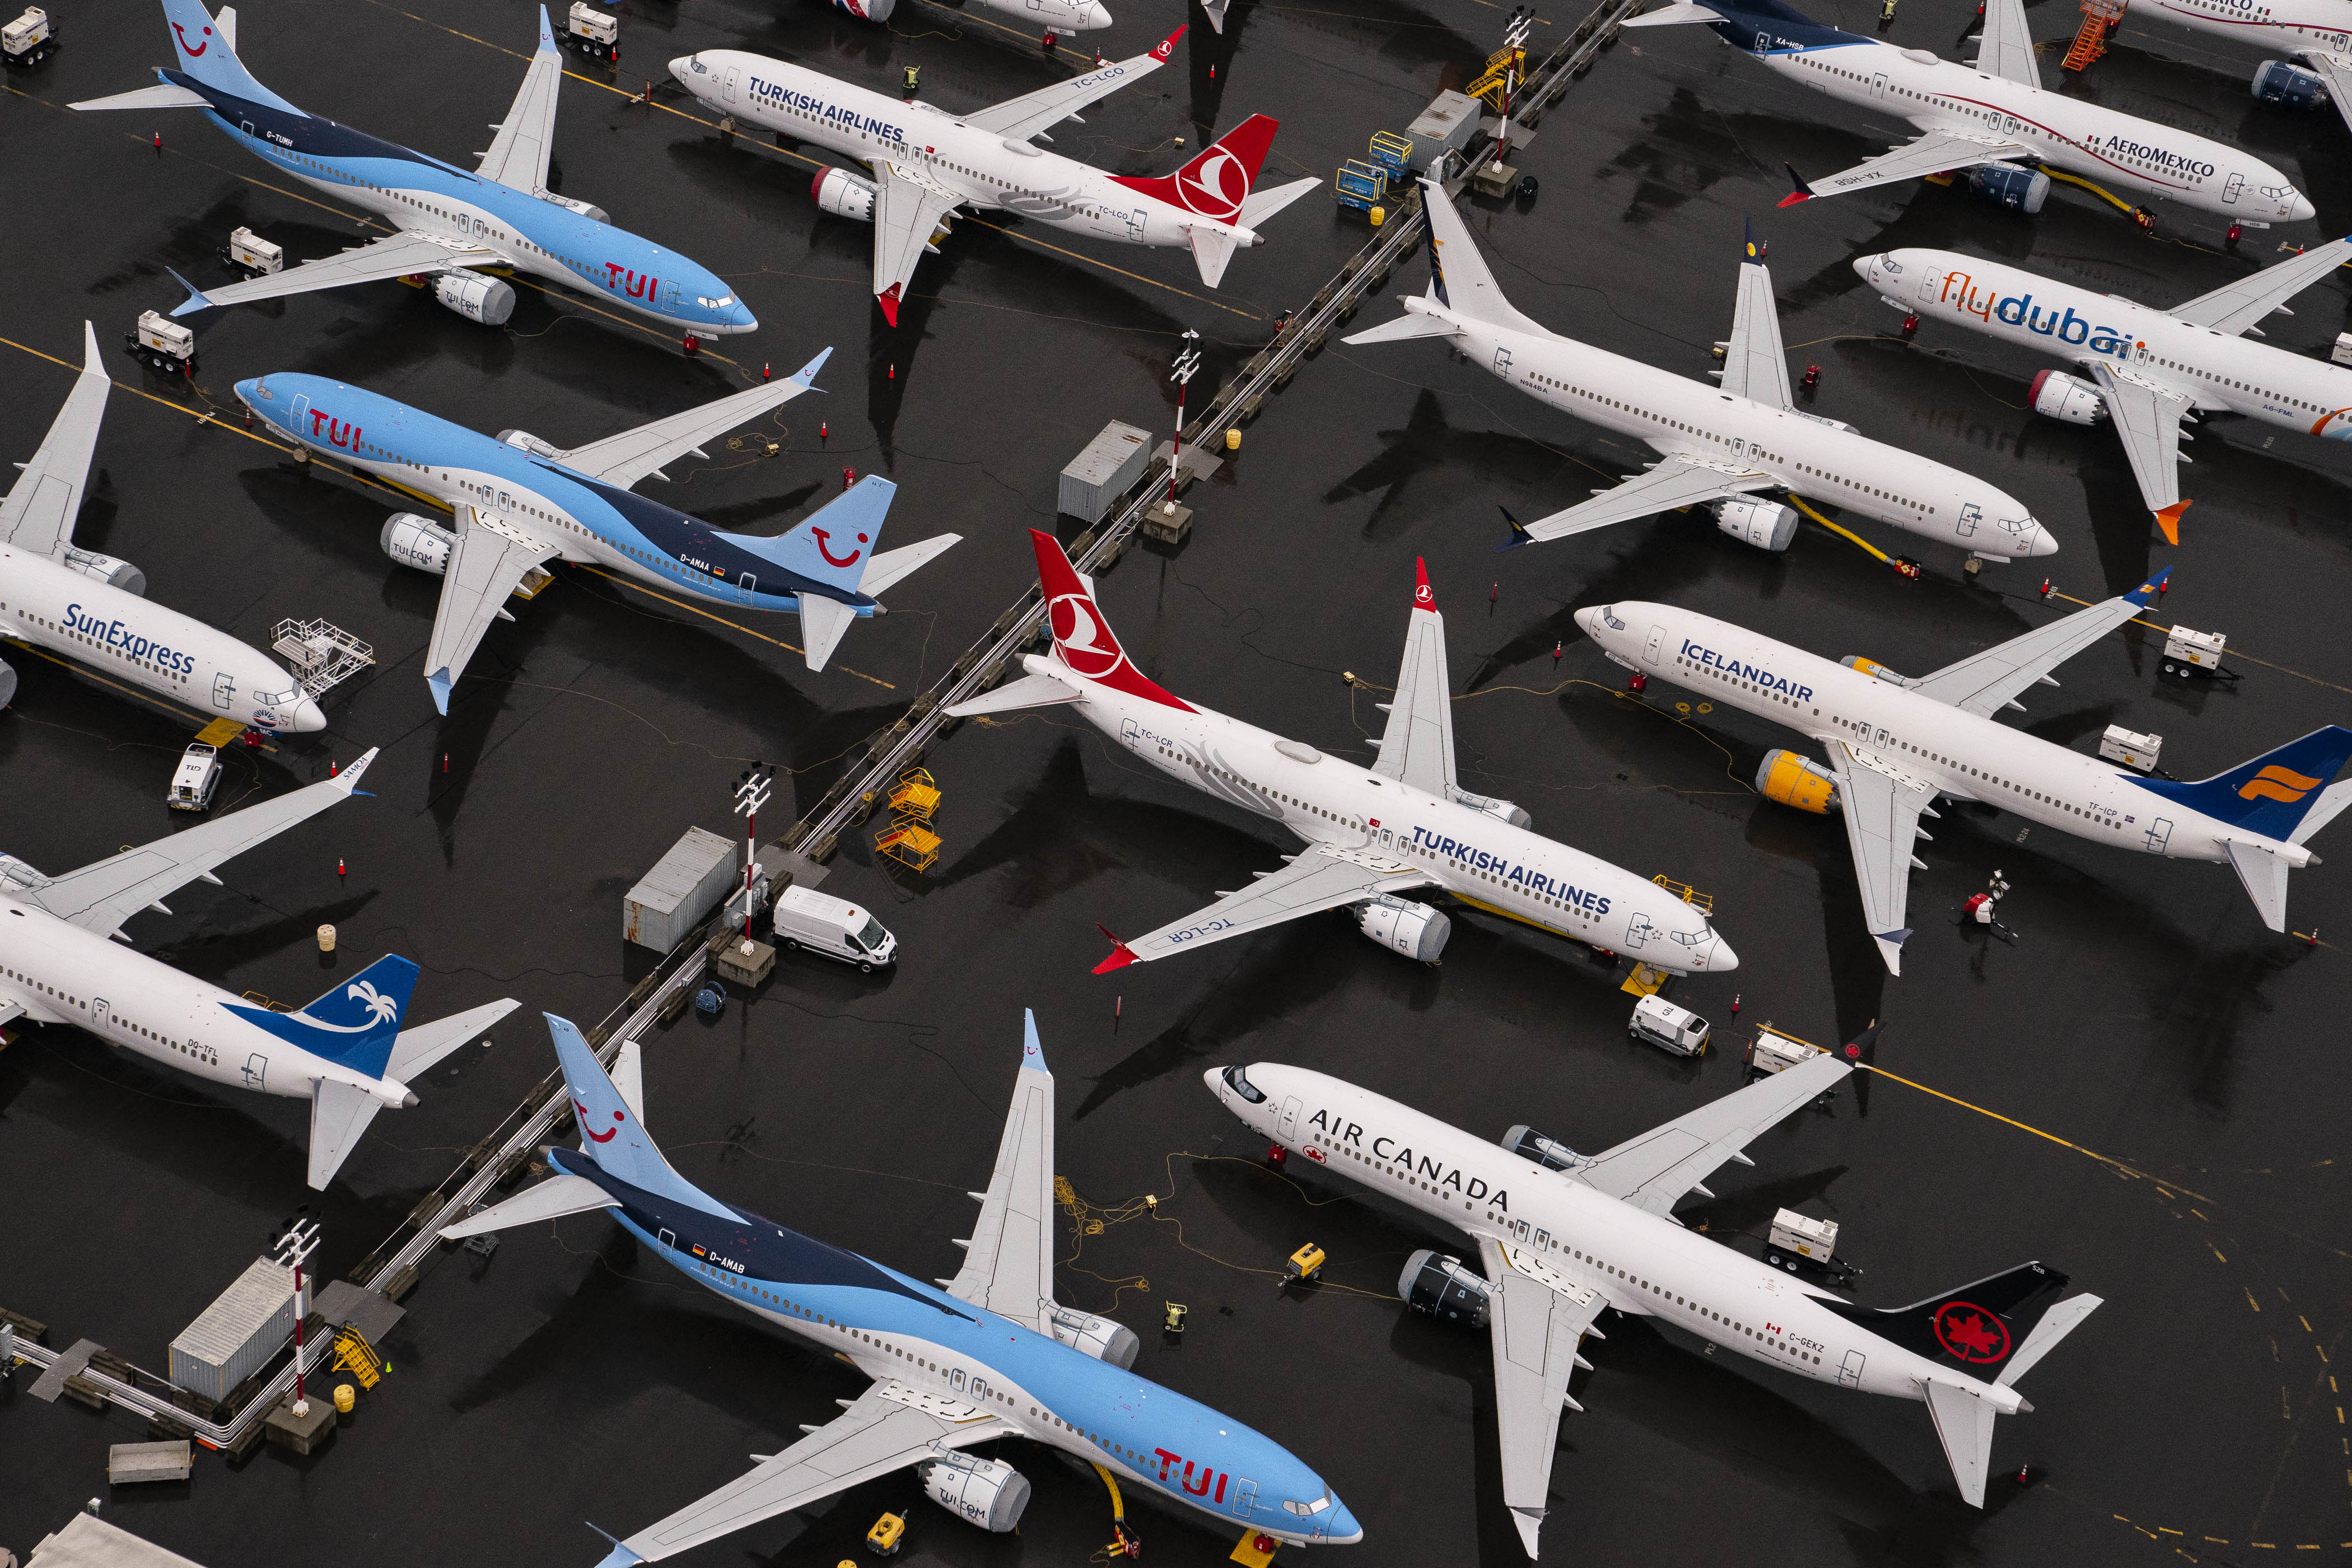 Boeing 737 Max airplanes sit parked at Boeing Field on November 18, 2020 in Seattle, Washington. The U.S. Federal Aviation Administration (FAA) cleared the Max for flight after 20 months of grounding. The 737 Max was grounded worldwide since March 2019 after two deadly crashes in Indonesia and Ethiopia. (Photo by David Ryder/Getty Images)